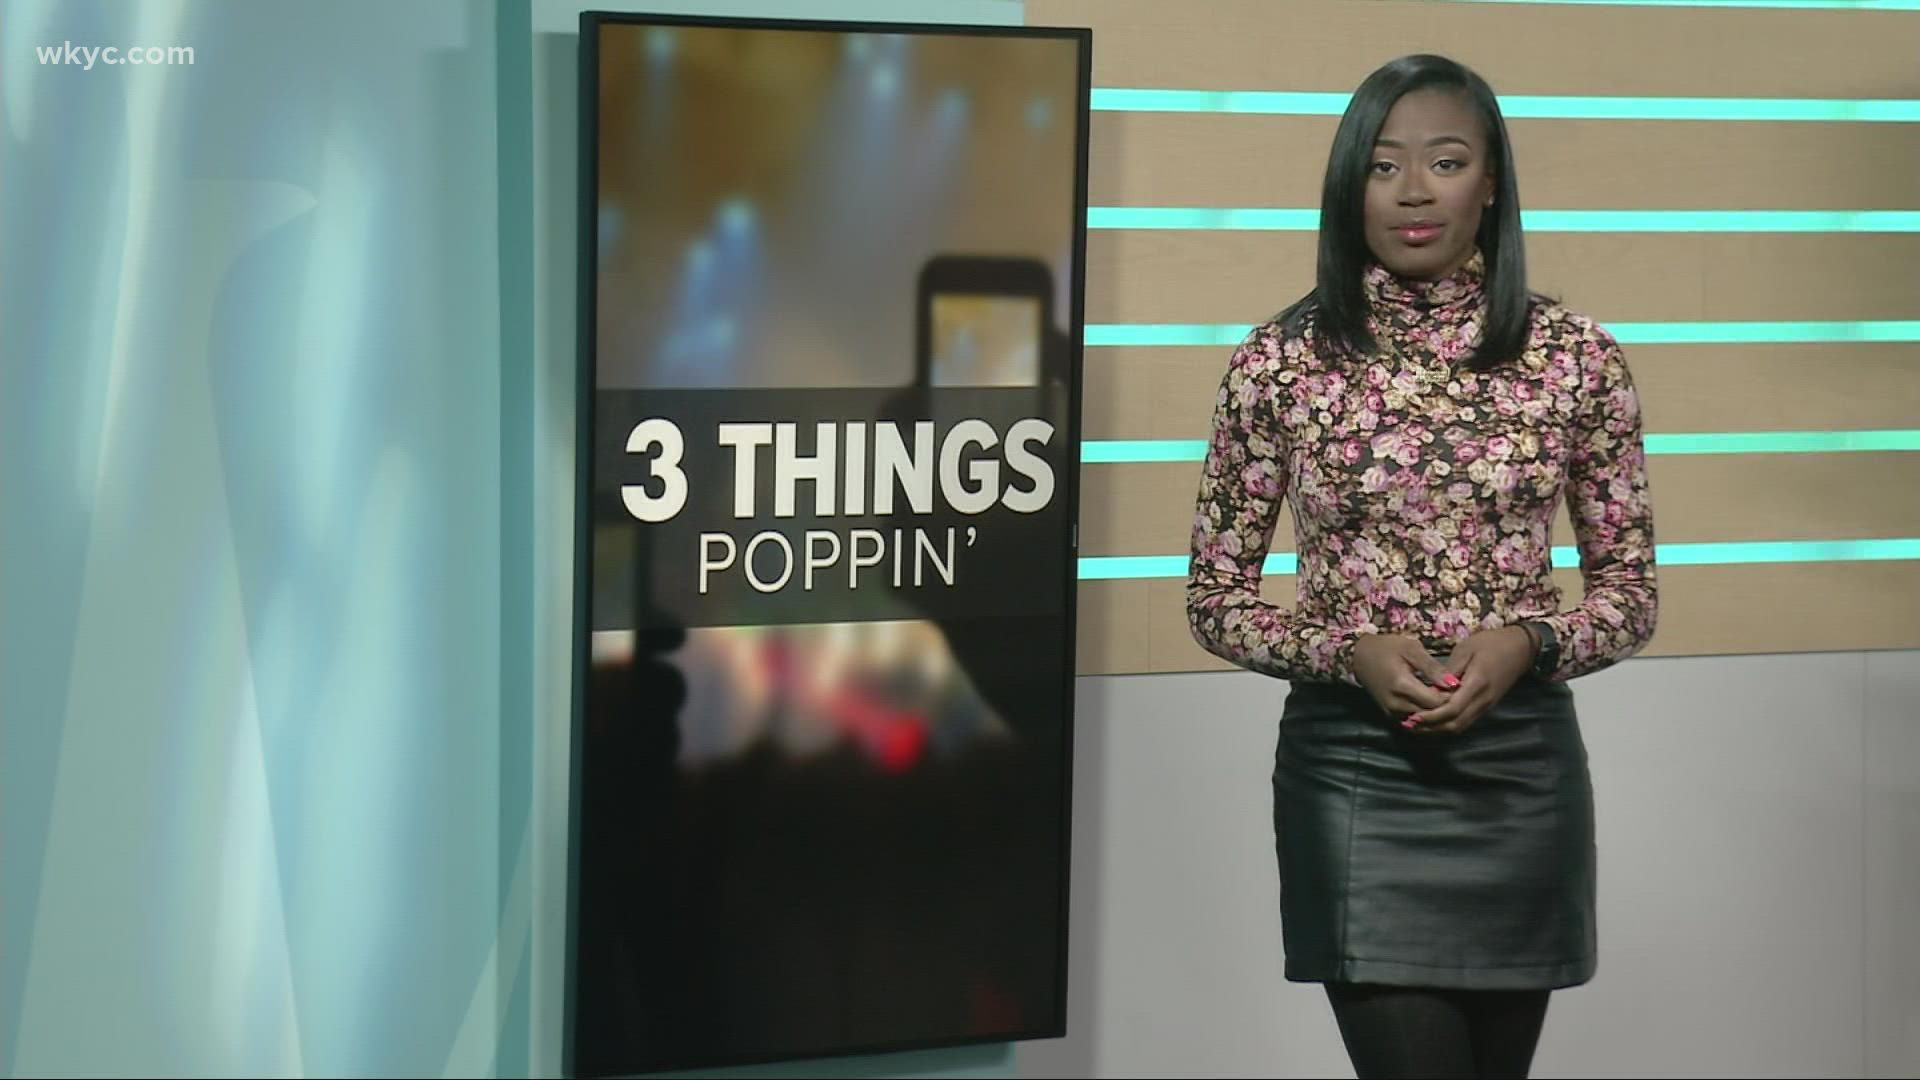 Get out and enjoy all that Northeast Ohio has to offer this weekend! Kierra Cotton has a look at what's poppin'.